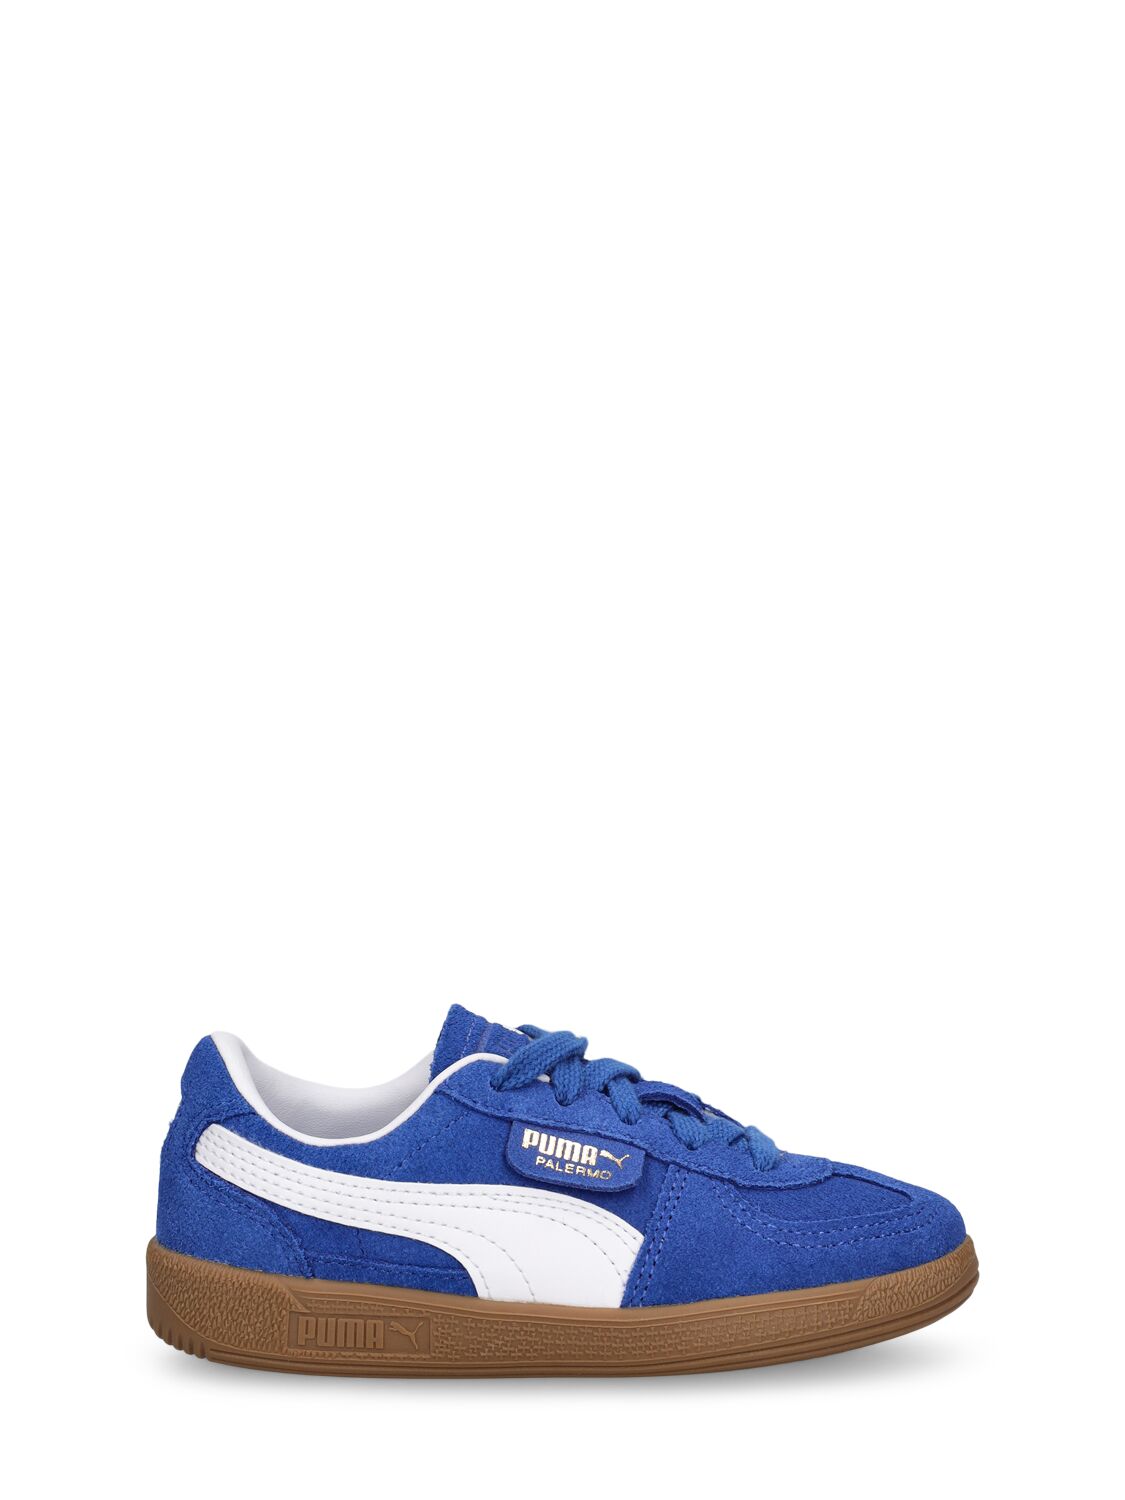 Puma Kids' Palermo Ps Lace-up Sneakers In Blue